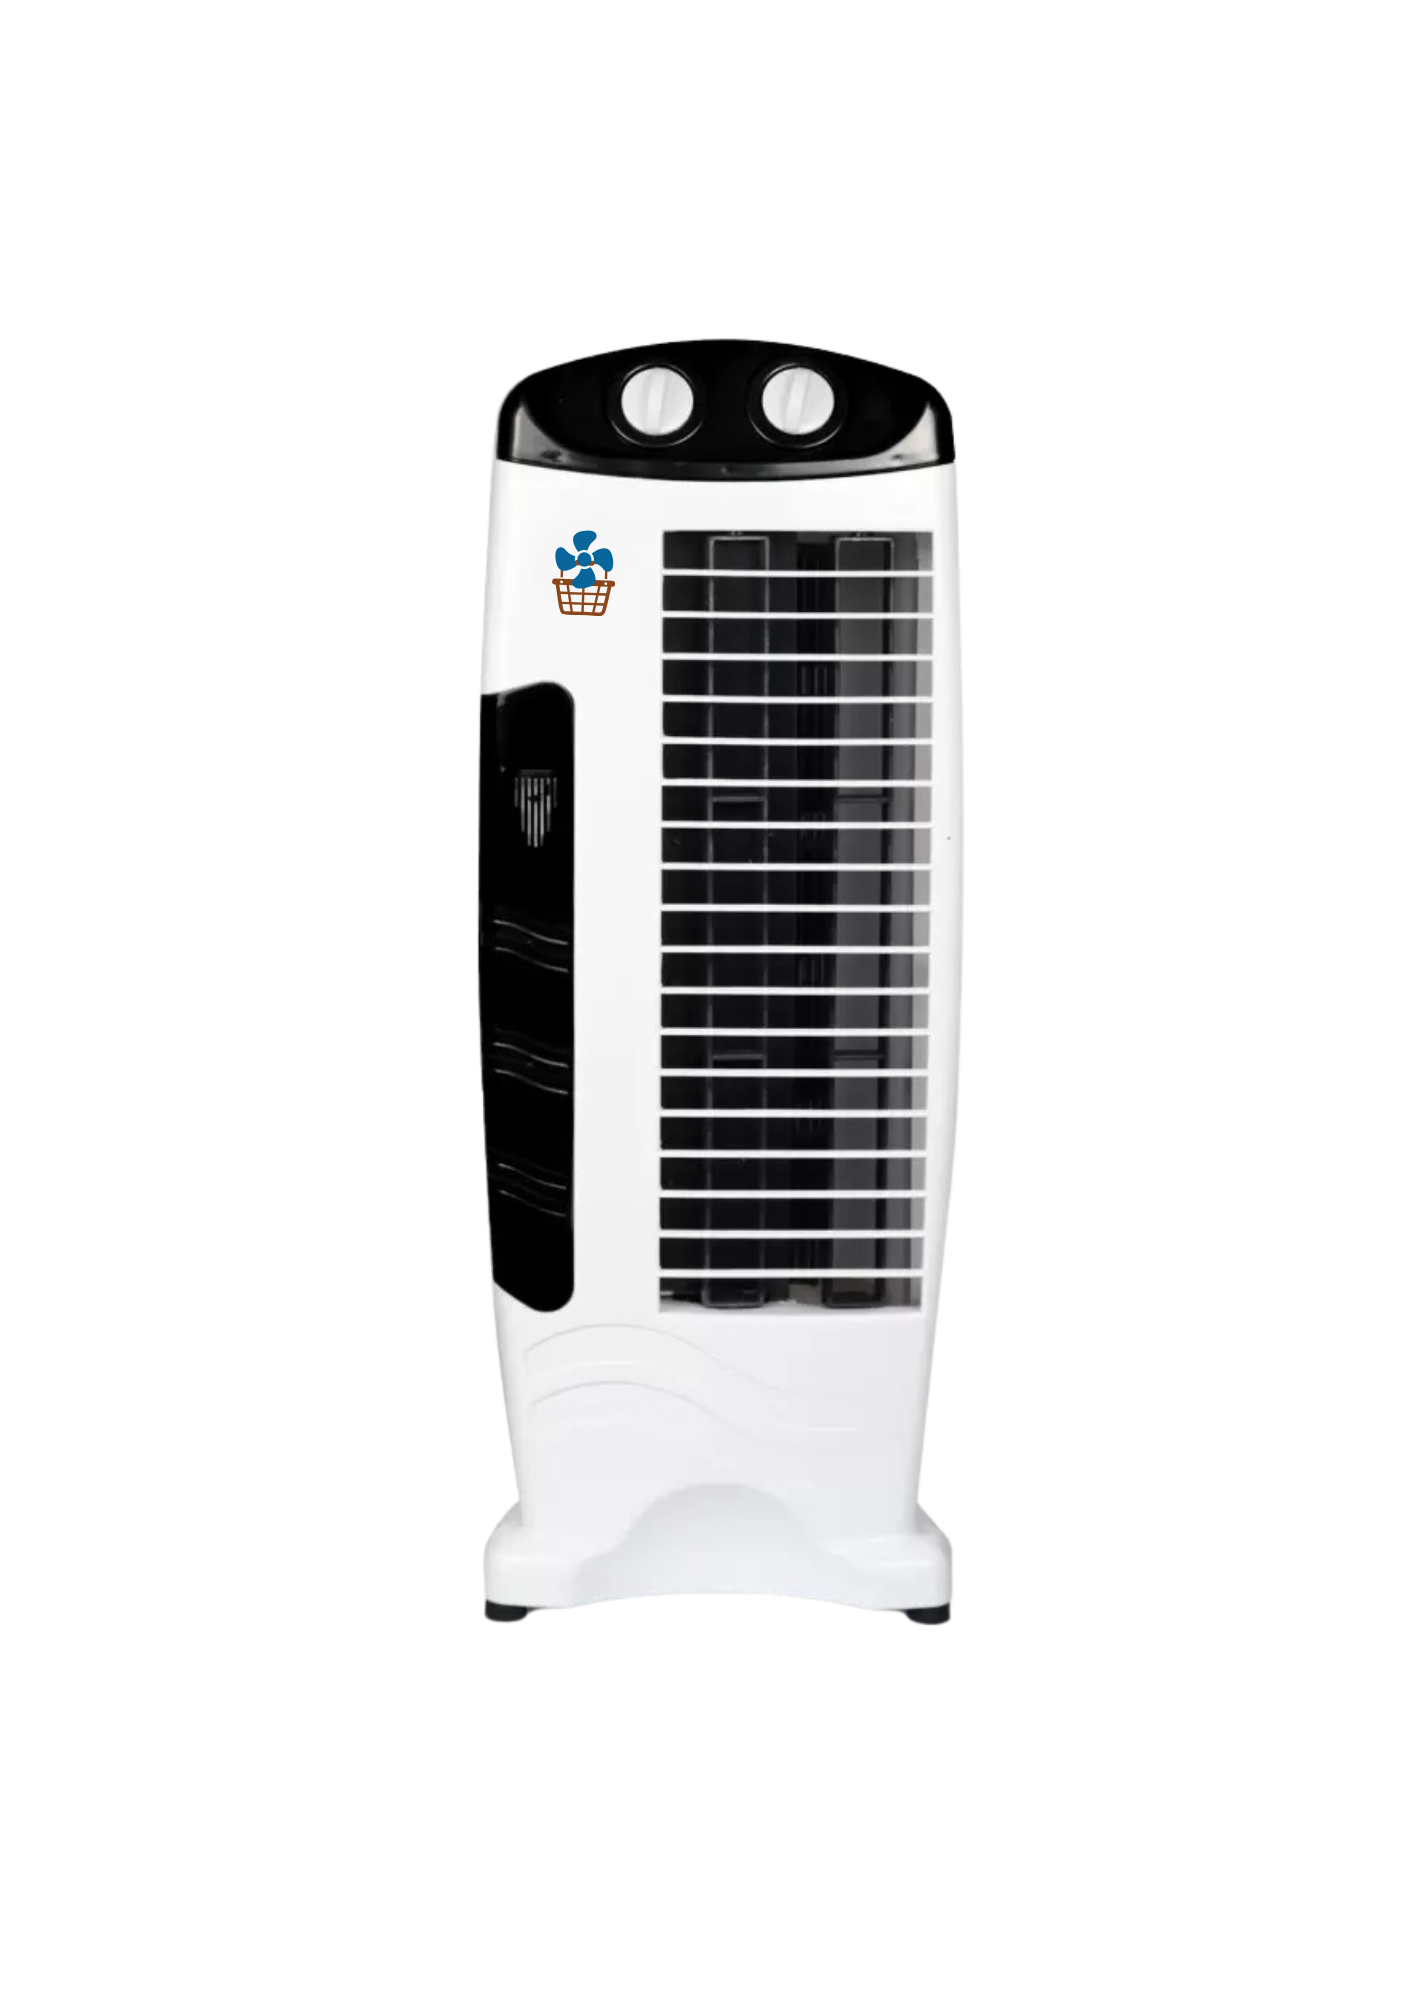 SuperBlower™ Tower Fan - 25-foot Air Delivery, 4-way Air Flow, Low Power Consumption and Anti-Rust Body